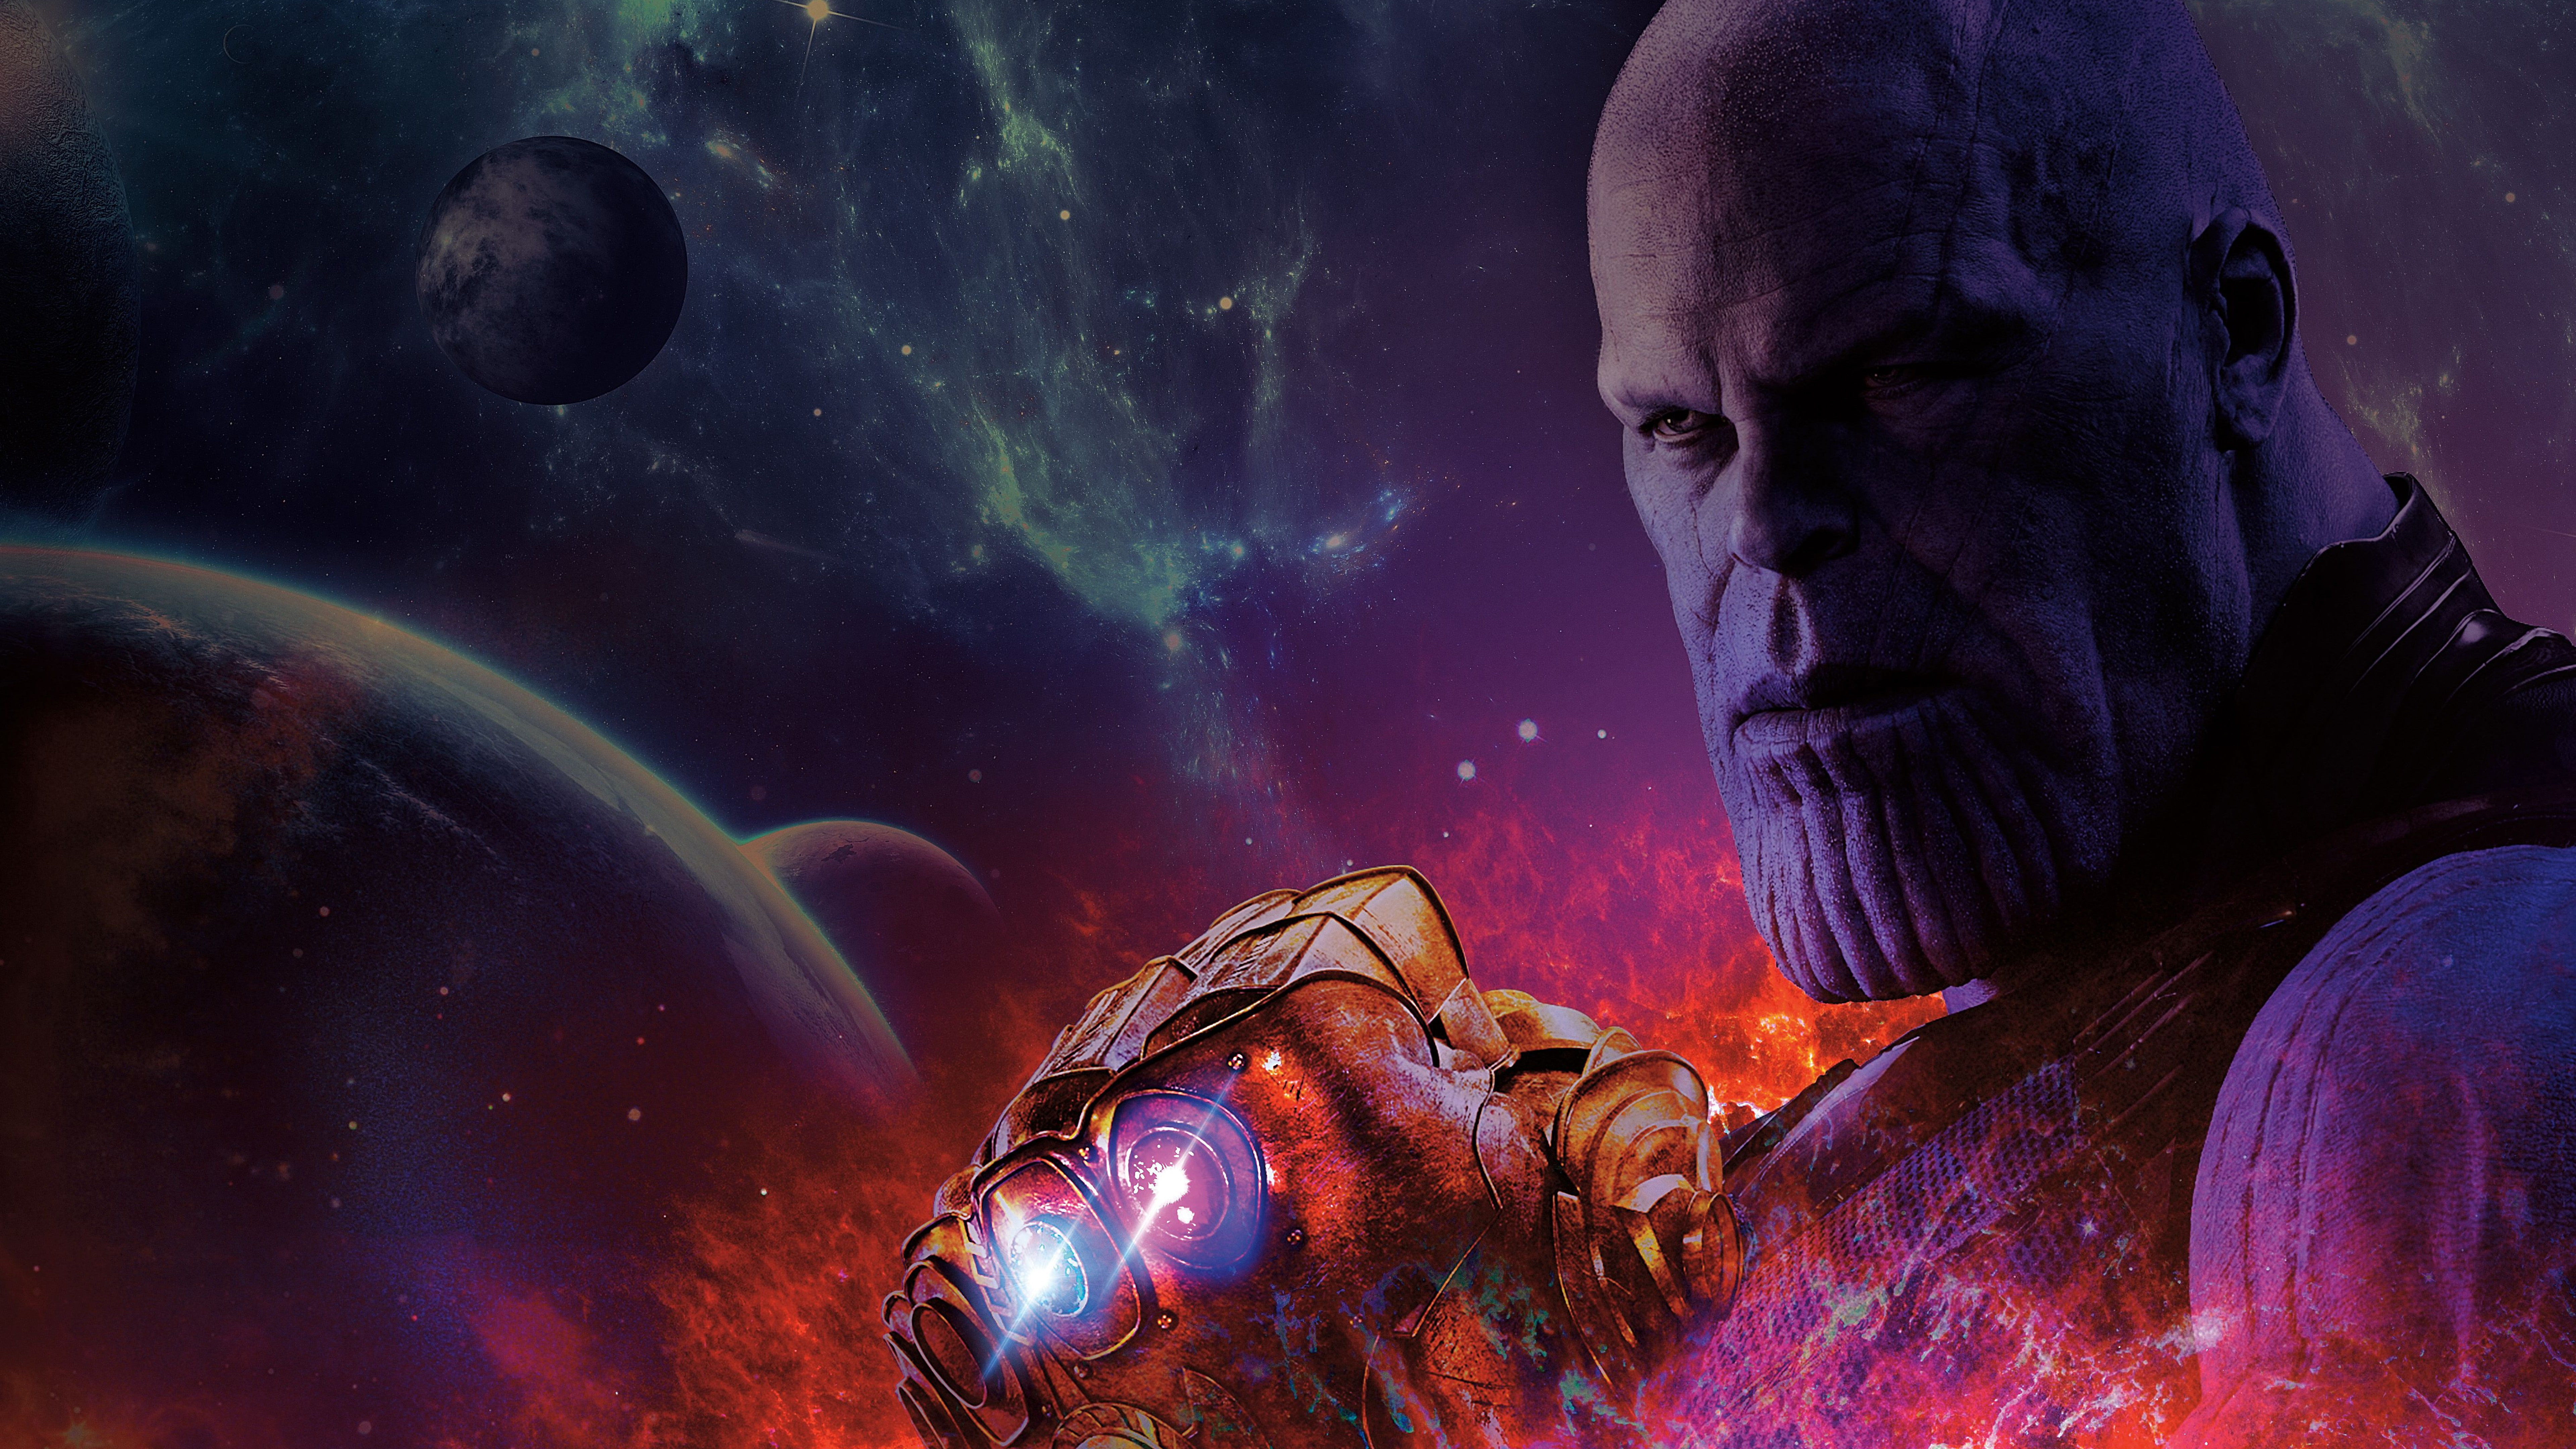 Thanos, Avengers Infinity War, movies, Marvel Cinematic Universe